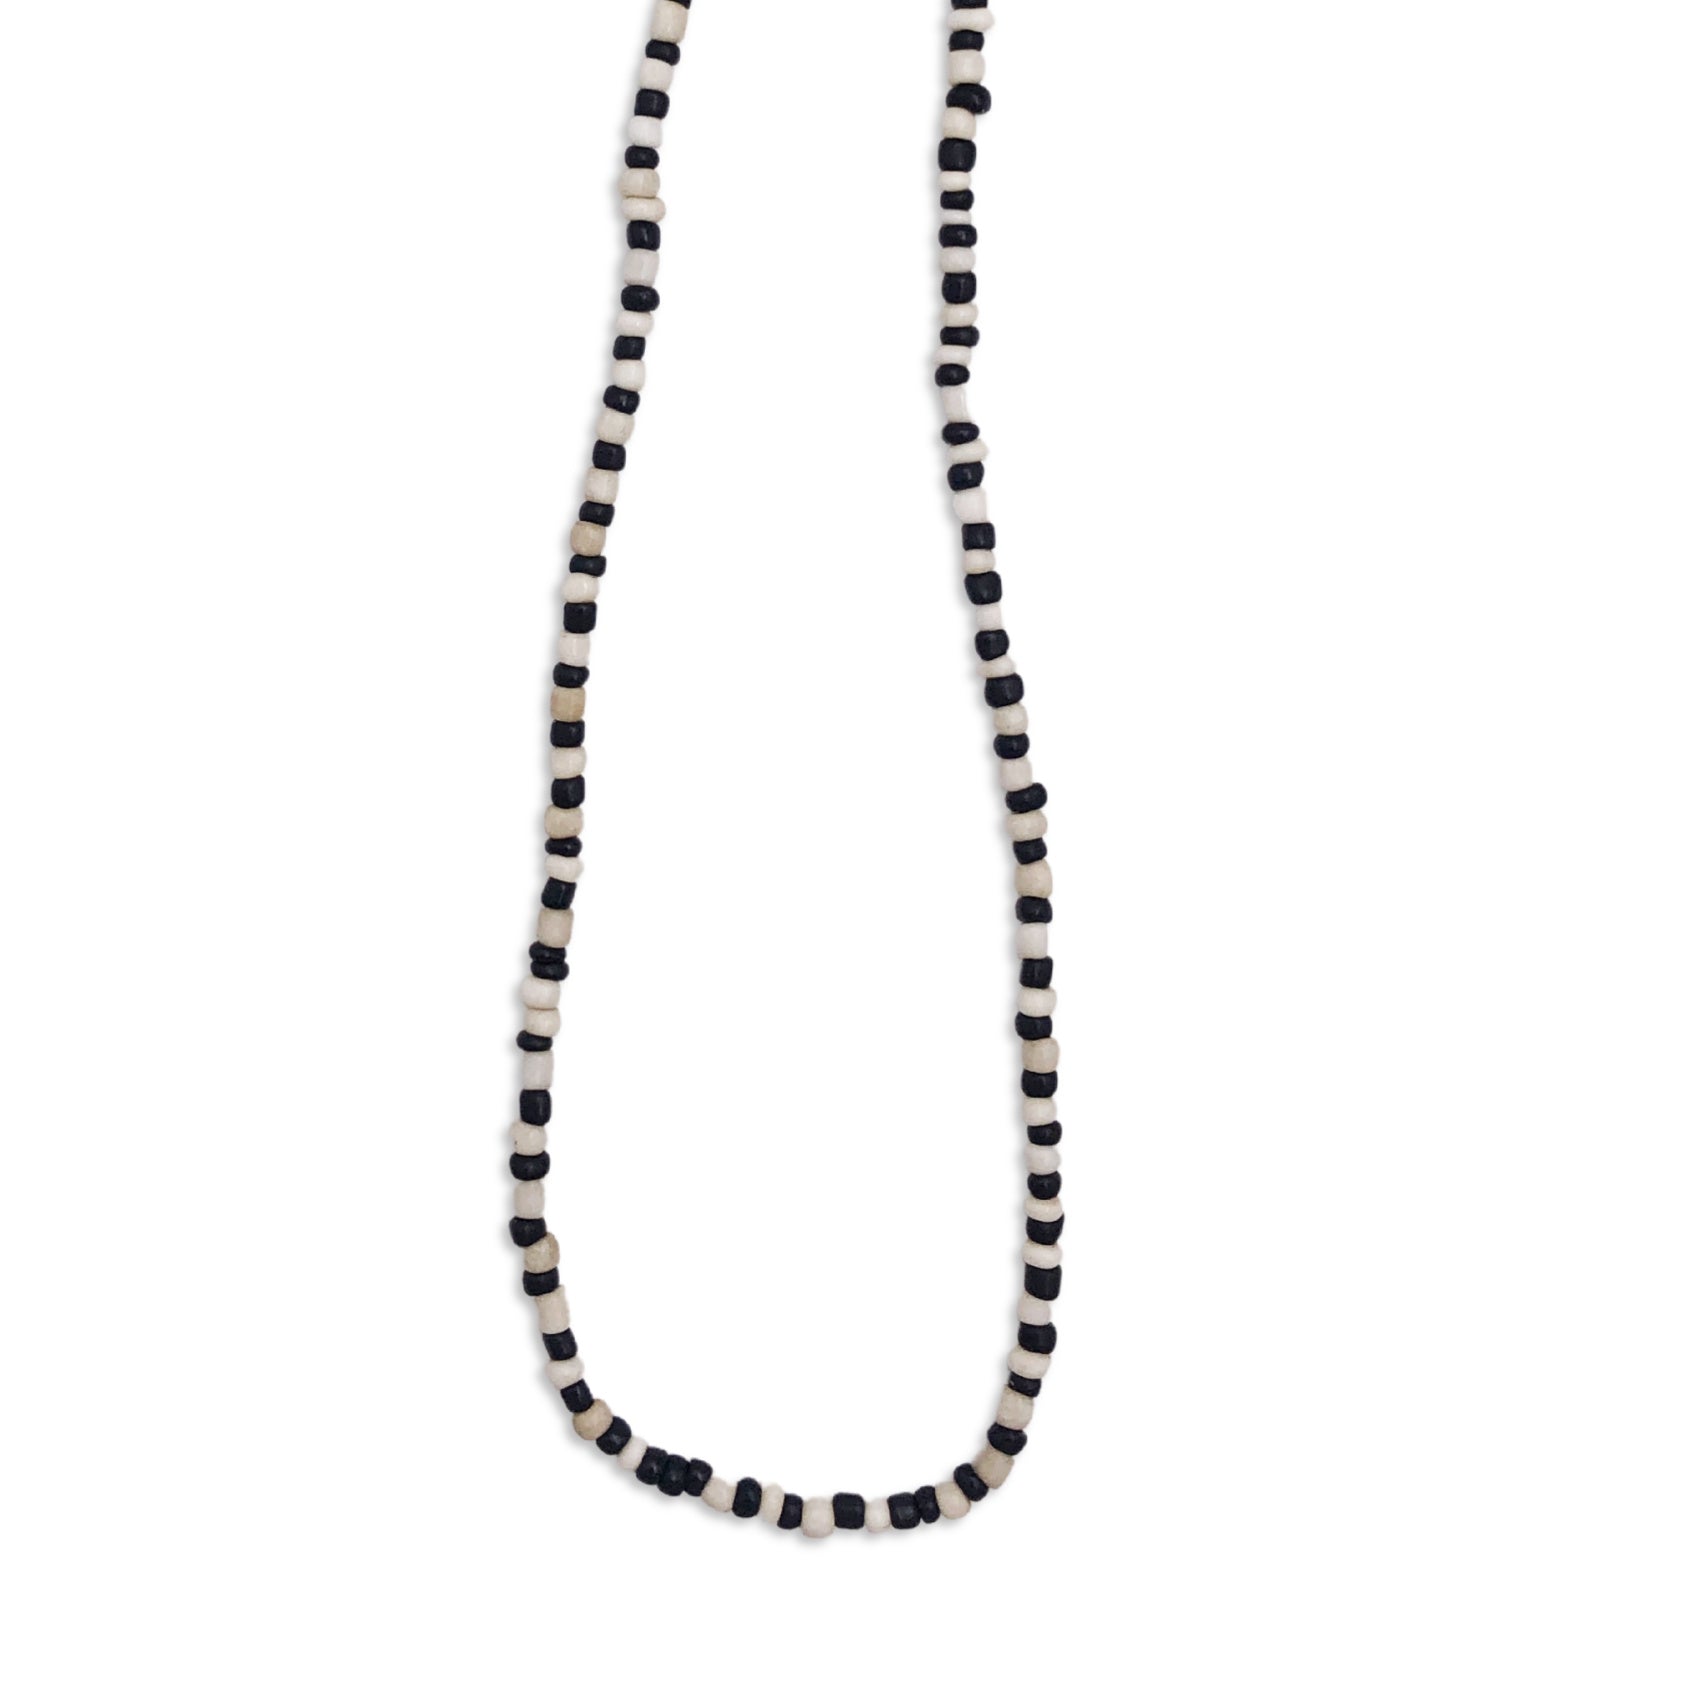 Gender Neutral Black and White African Beaded Necklace